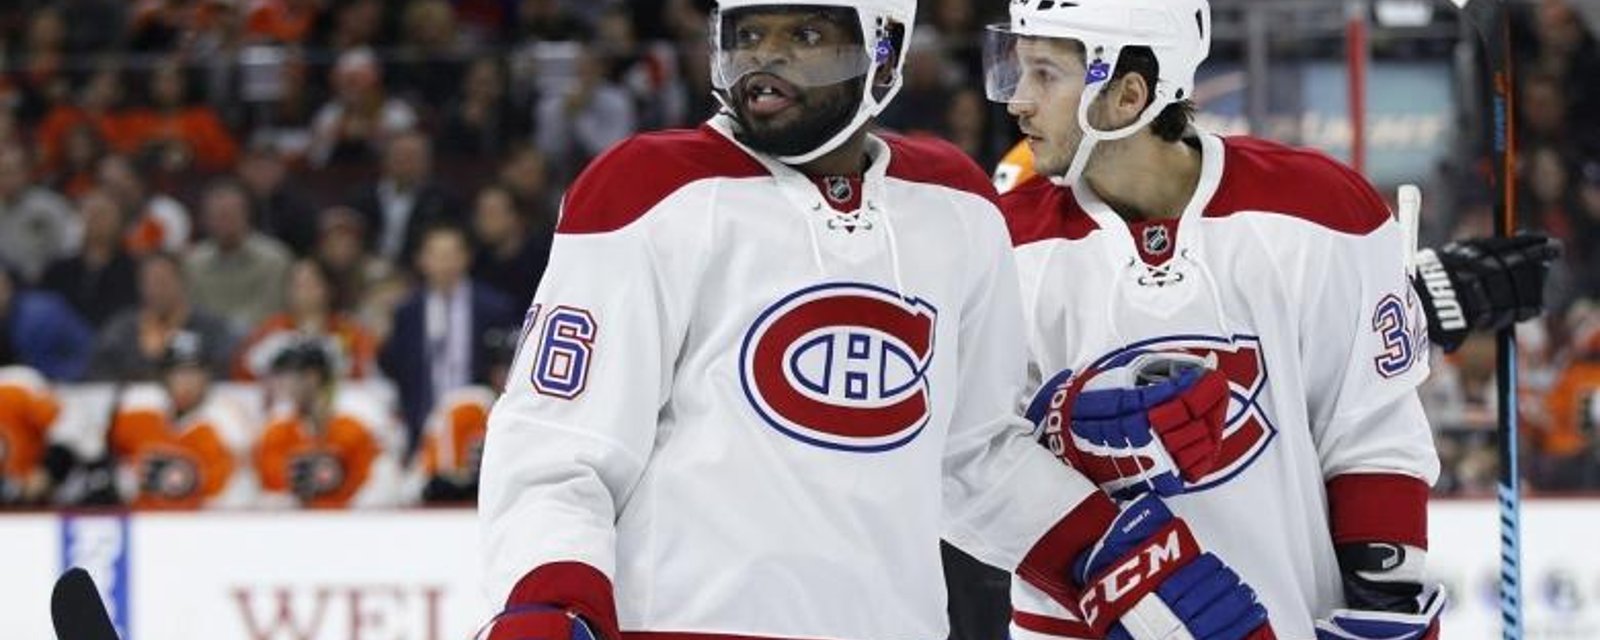 NHL GM comments on the rumors of P.K. Subban being traded to his team.